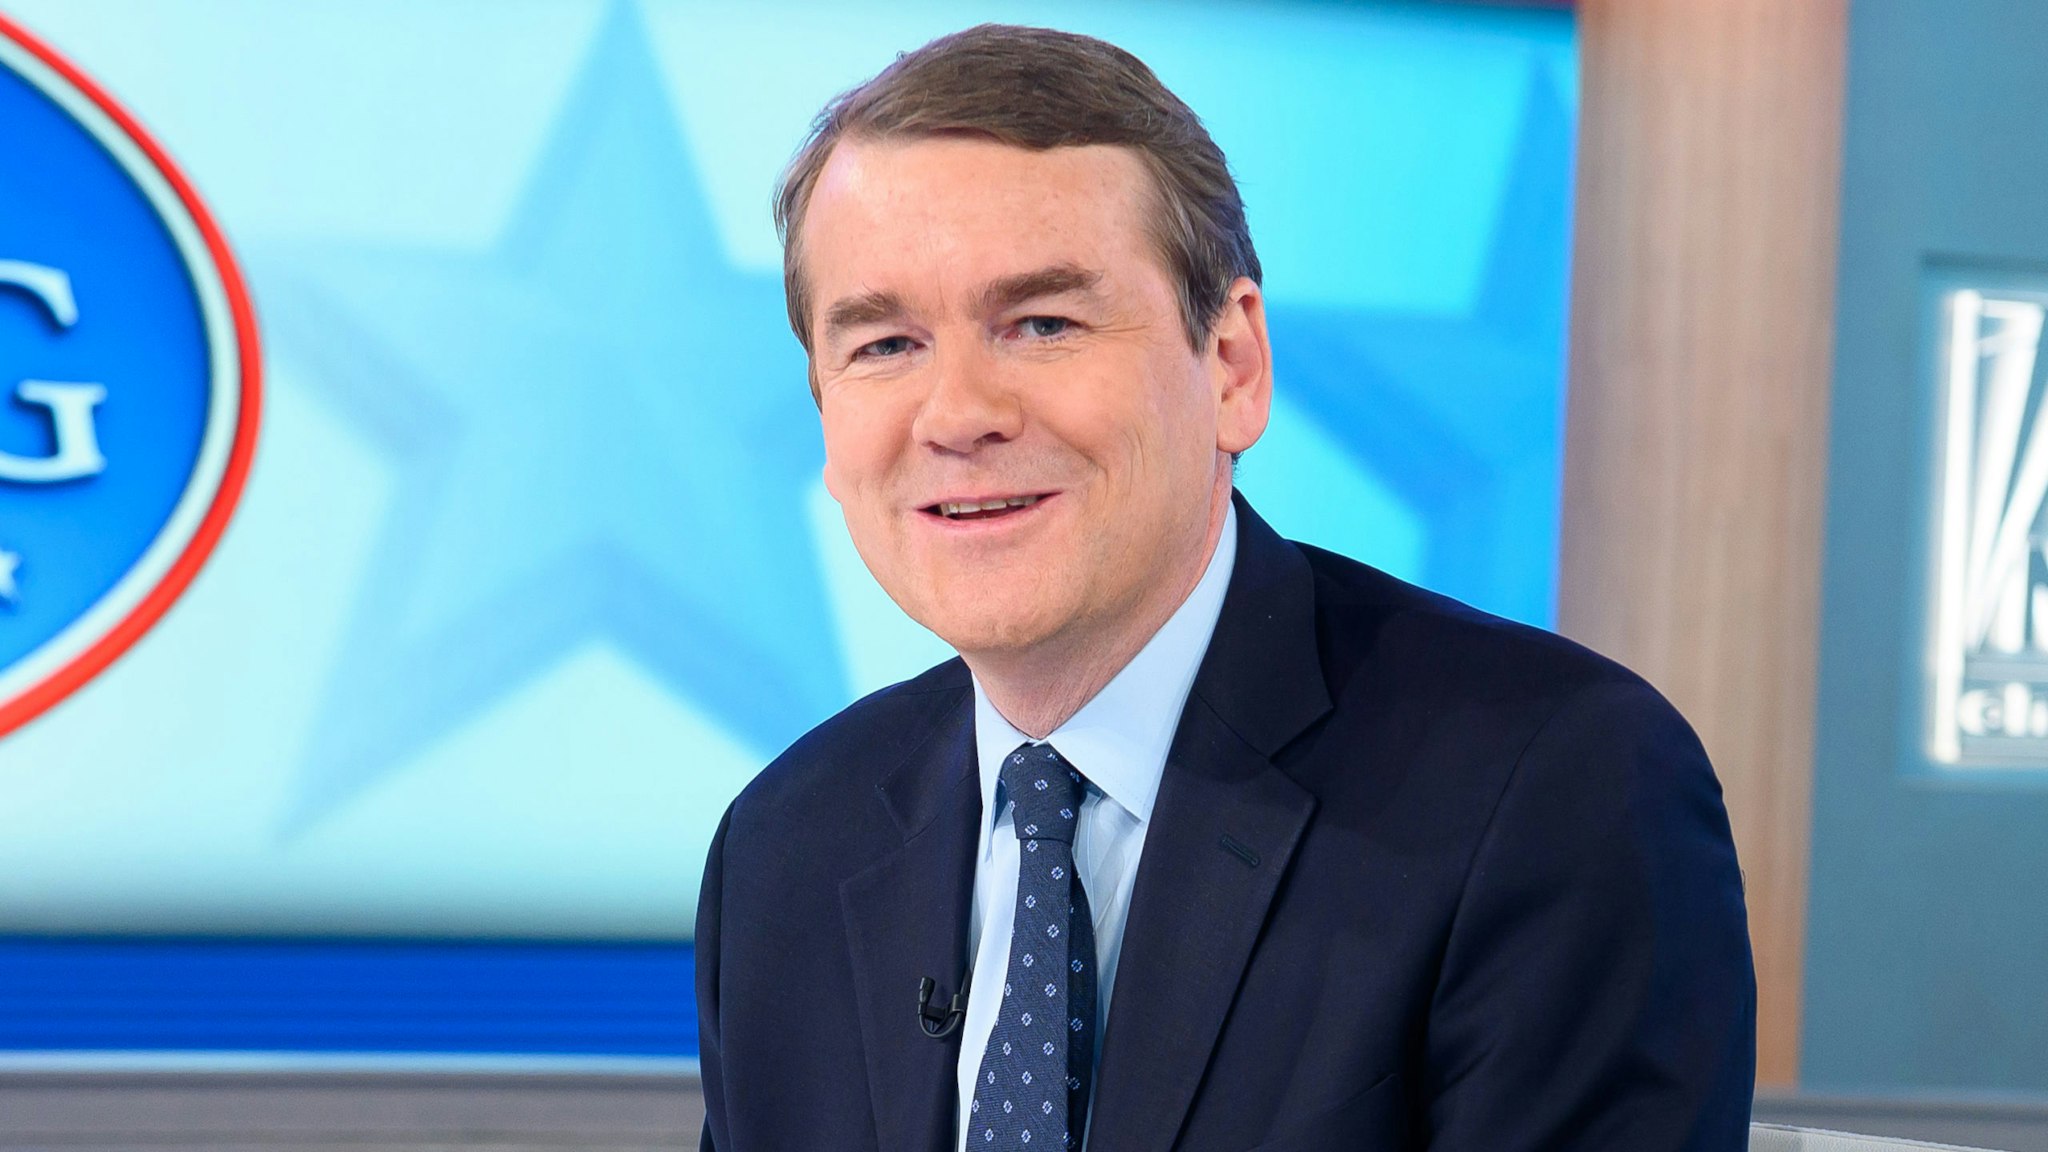 NEW YORK, NEW YORK - NOVEMBER 22: Senator Michael Bennet visits FOX News Channel's "The Daily Briefing with Dana Perino" at the Fox News Studios on November 22, 2019 in New York City.